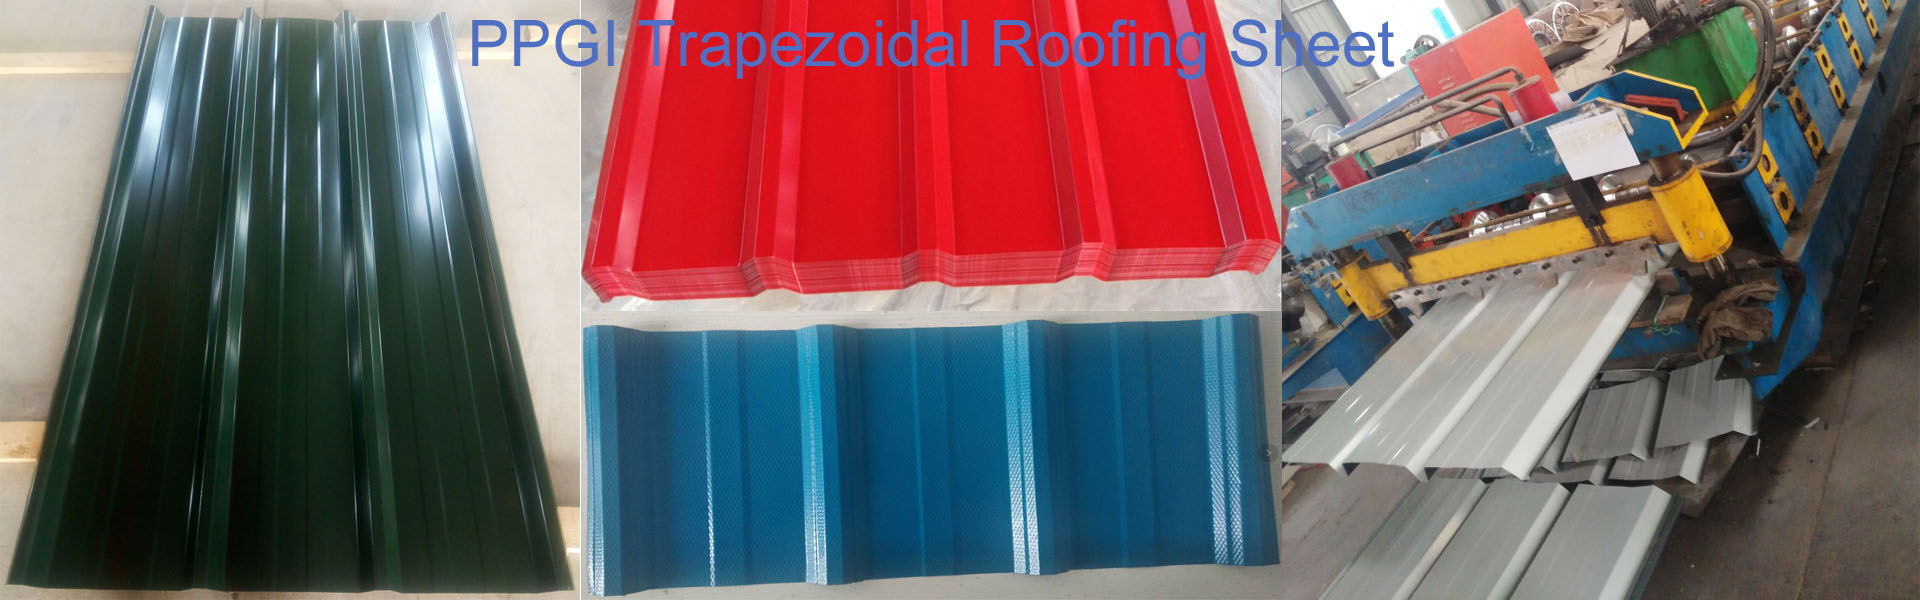 Trapezoidal roofing sheet